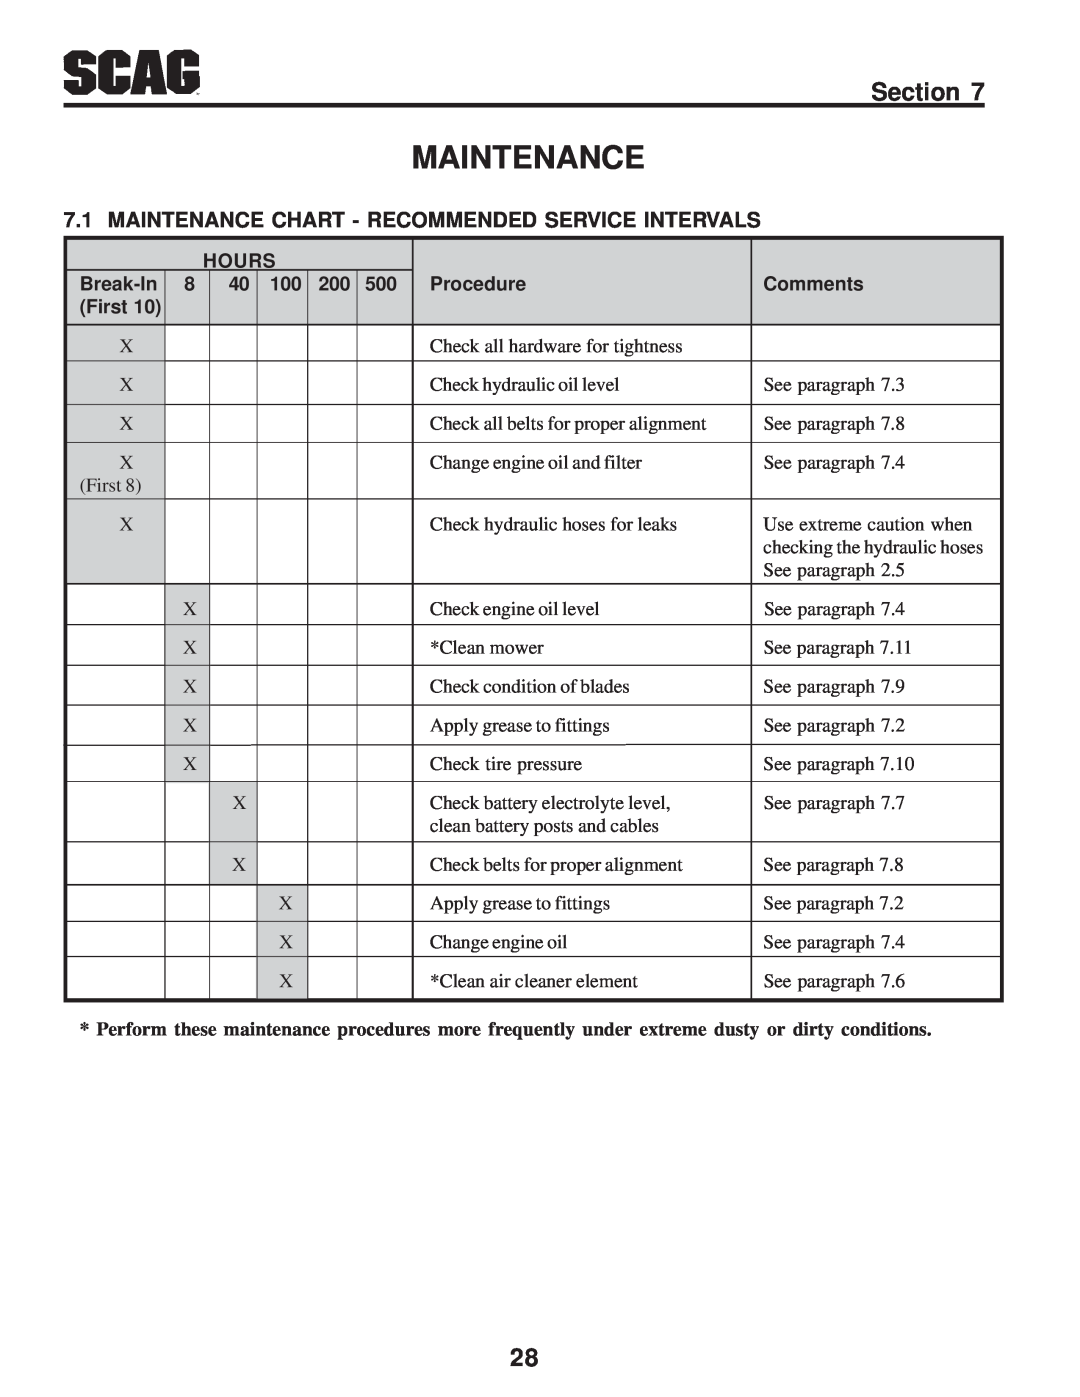 Scag Power Equipment SZC manual Maintenance Chart - Recommended Service Intervals 